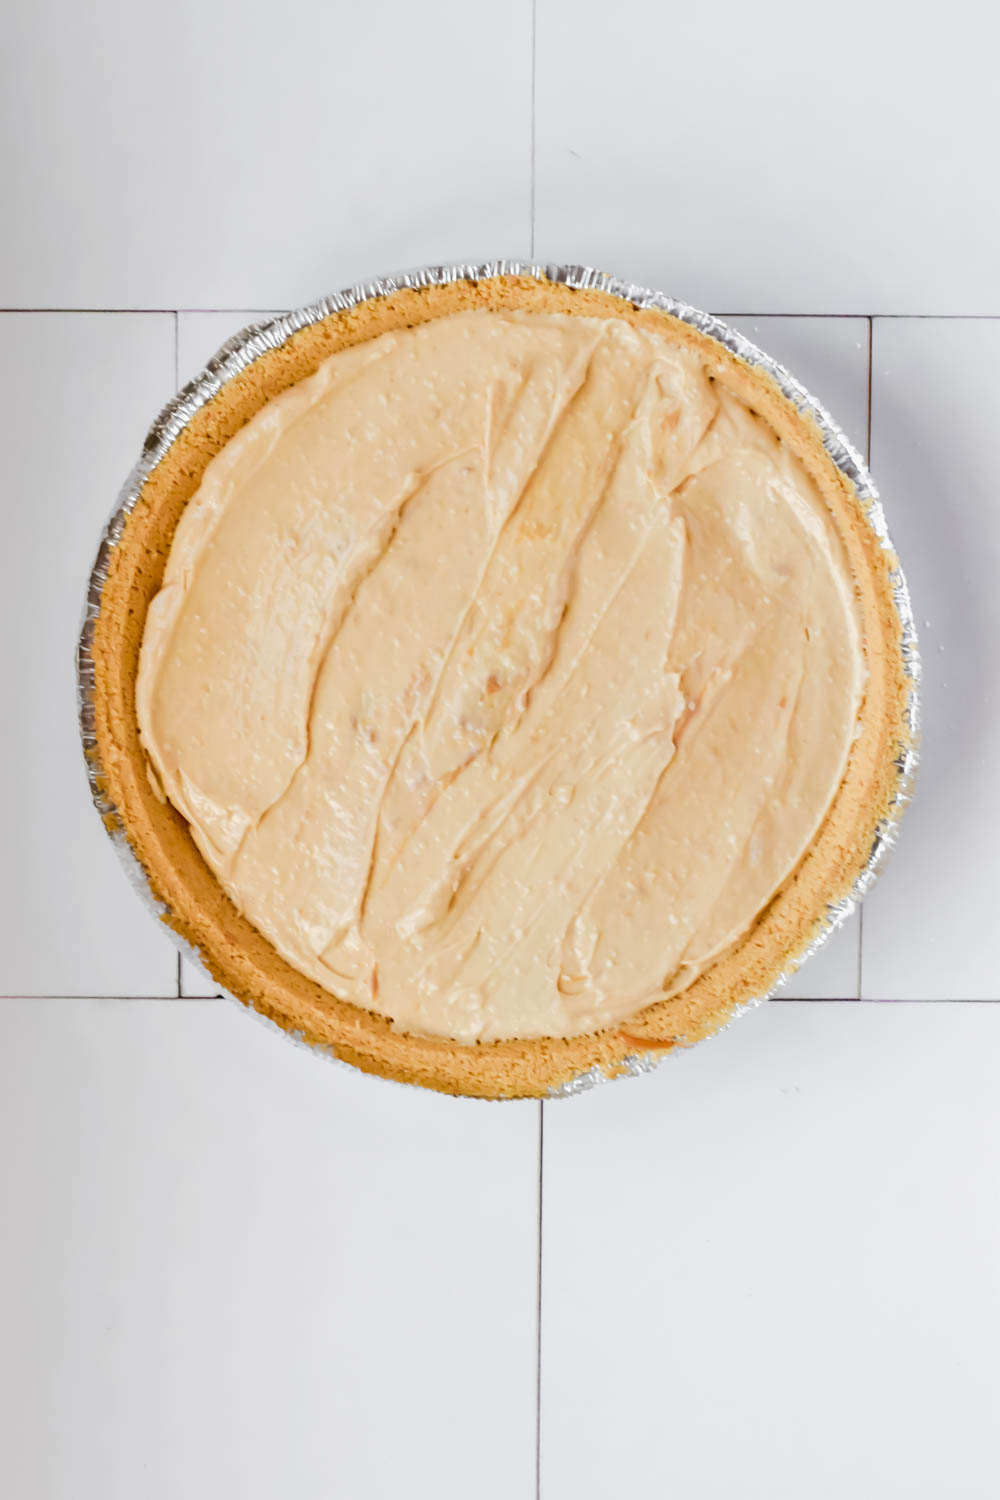 nutter butter pie in foil pie pan on white background.